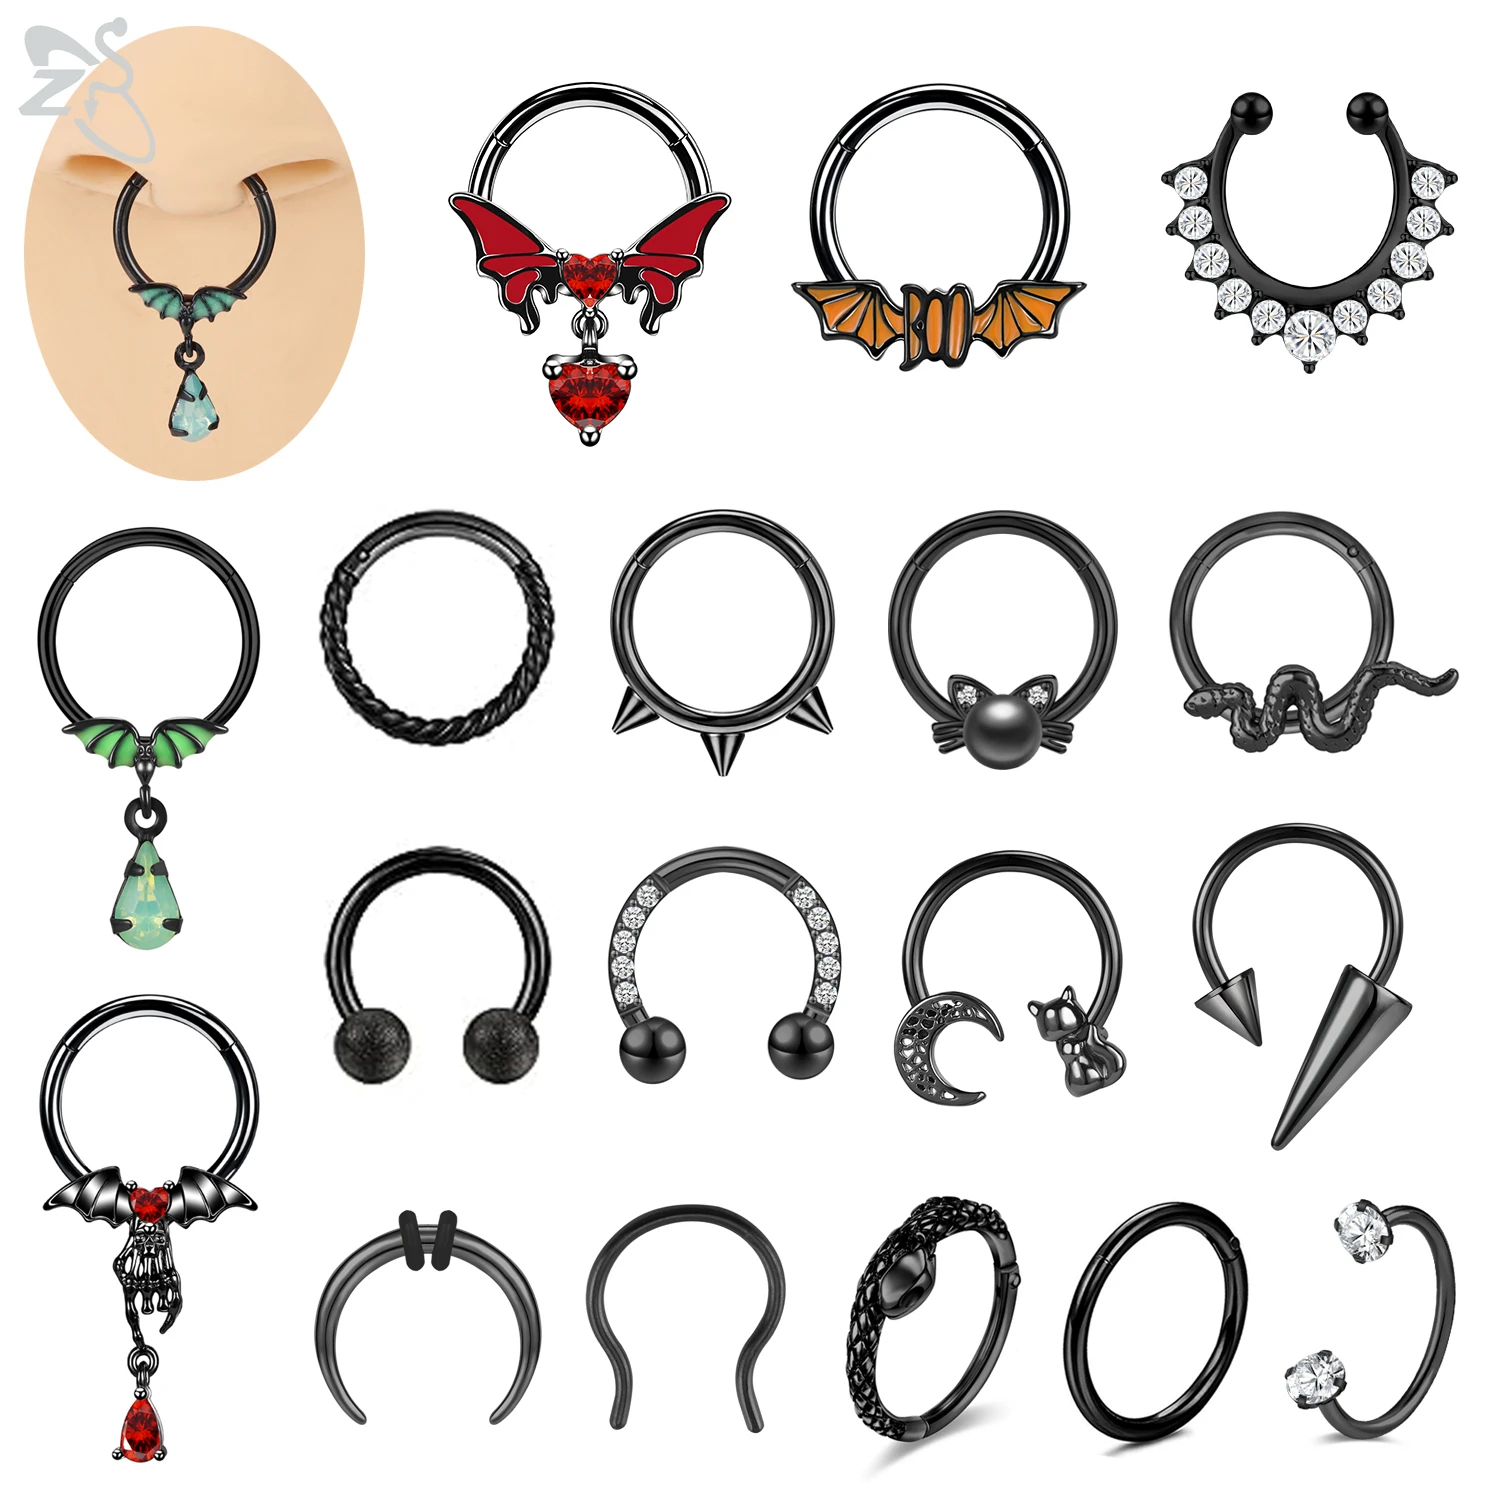 

ZS 1 PC Black Color Stainless Steel Nose Ring Punk Bat Spike Septum Piercings Cartilage Helix Tragus Piercing Body Jewelry 10MM